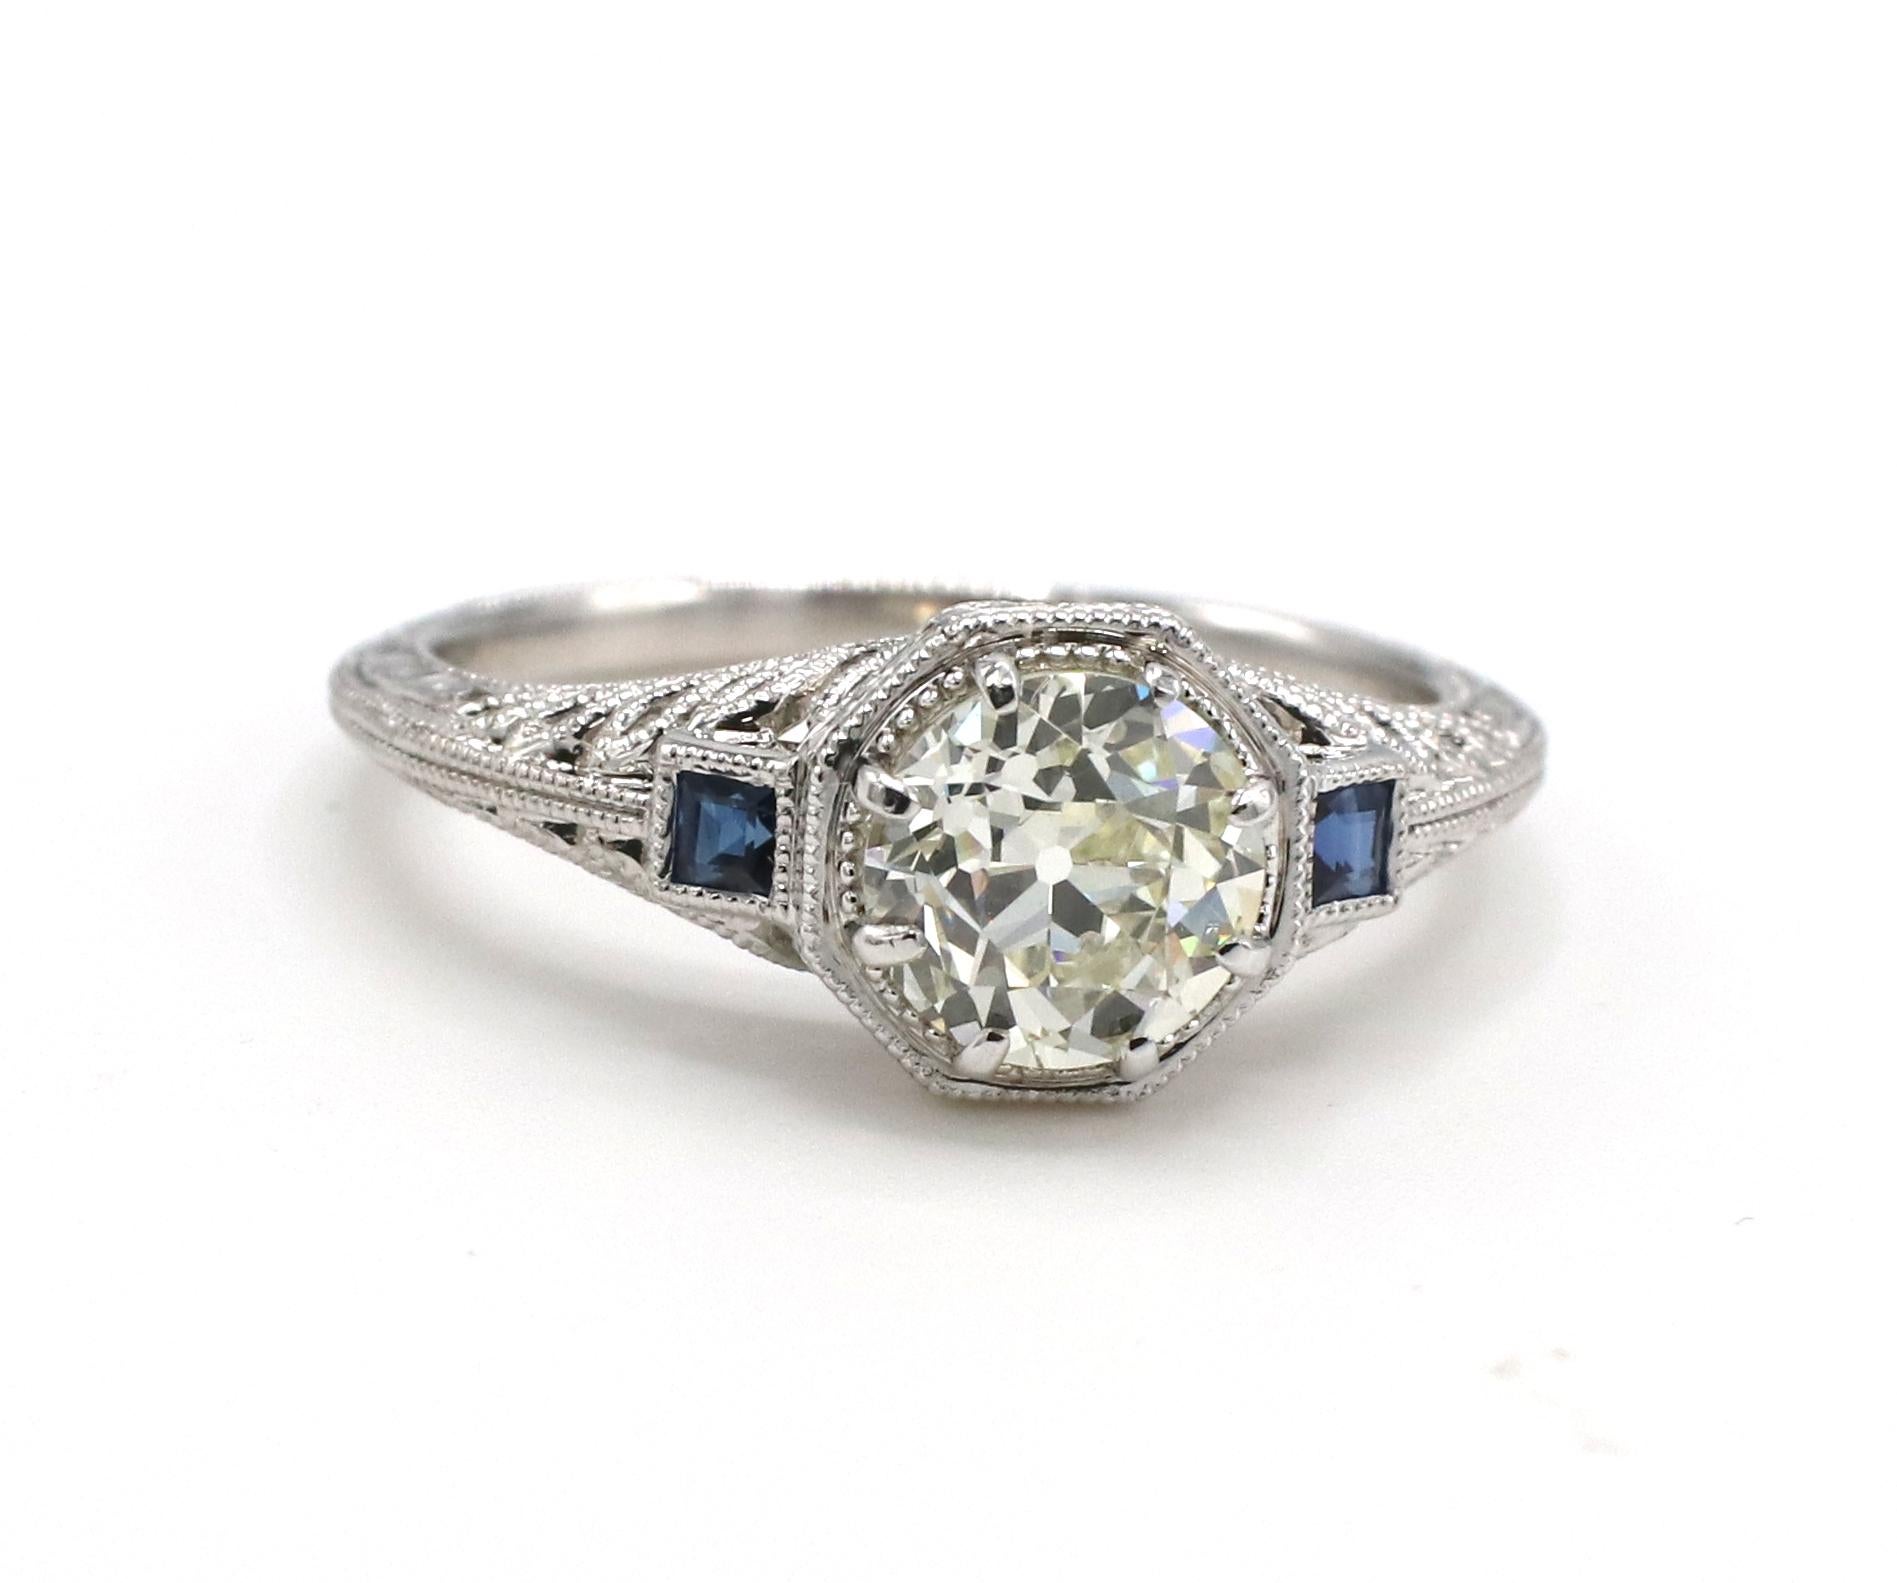 GIA Certified 1.02 Carat L VSI Old European Cut Art Deco Style Engagement Ring With Sapphires 
GIA Report number: 2225274431
Diamond: 1.02 carat Old European cut L VS1 natural diamond
Sapphires: 2 square cut blue sapphires, approx. .10 CTW
Metal: